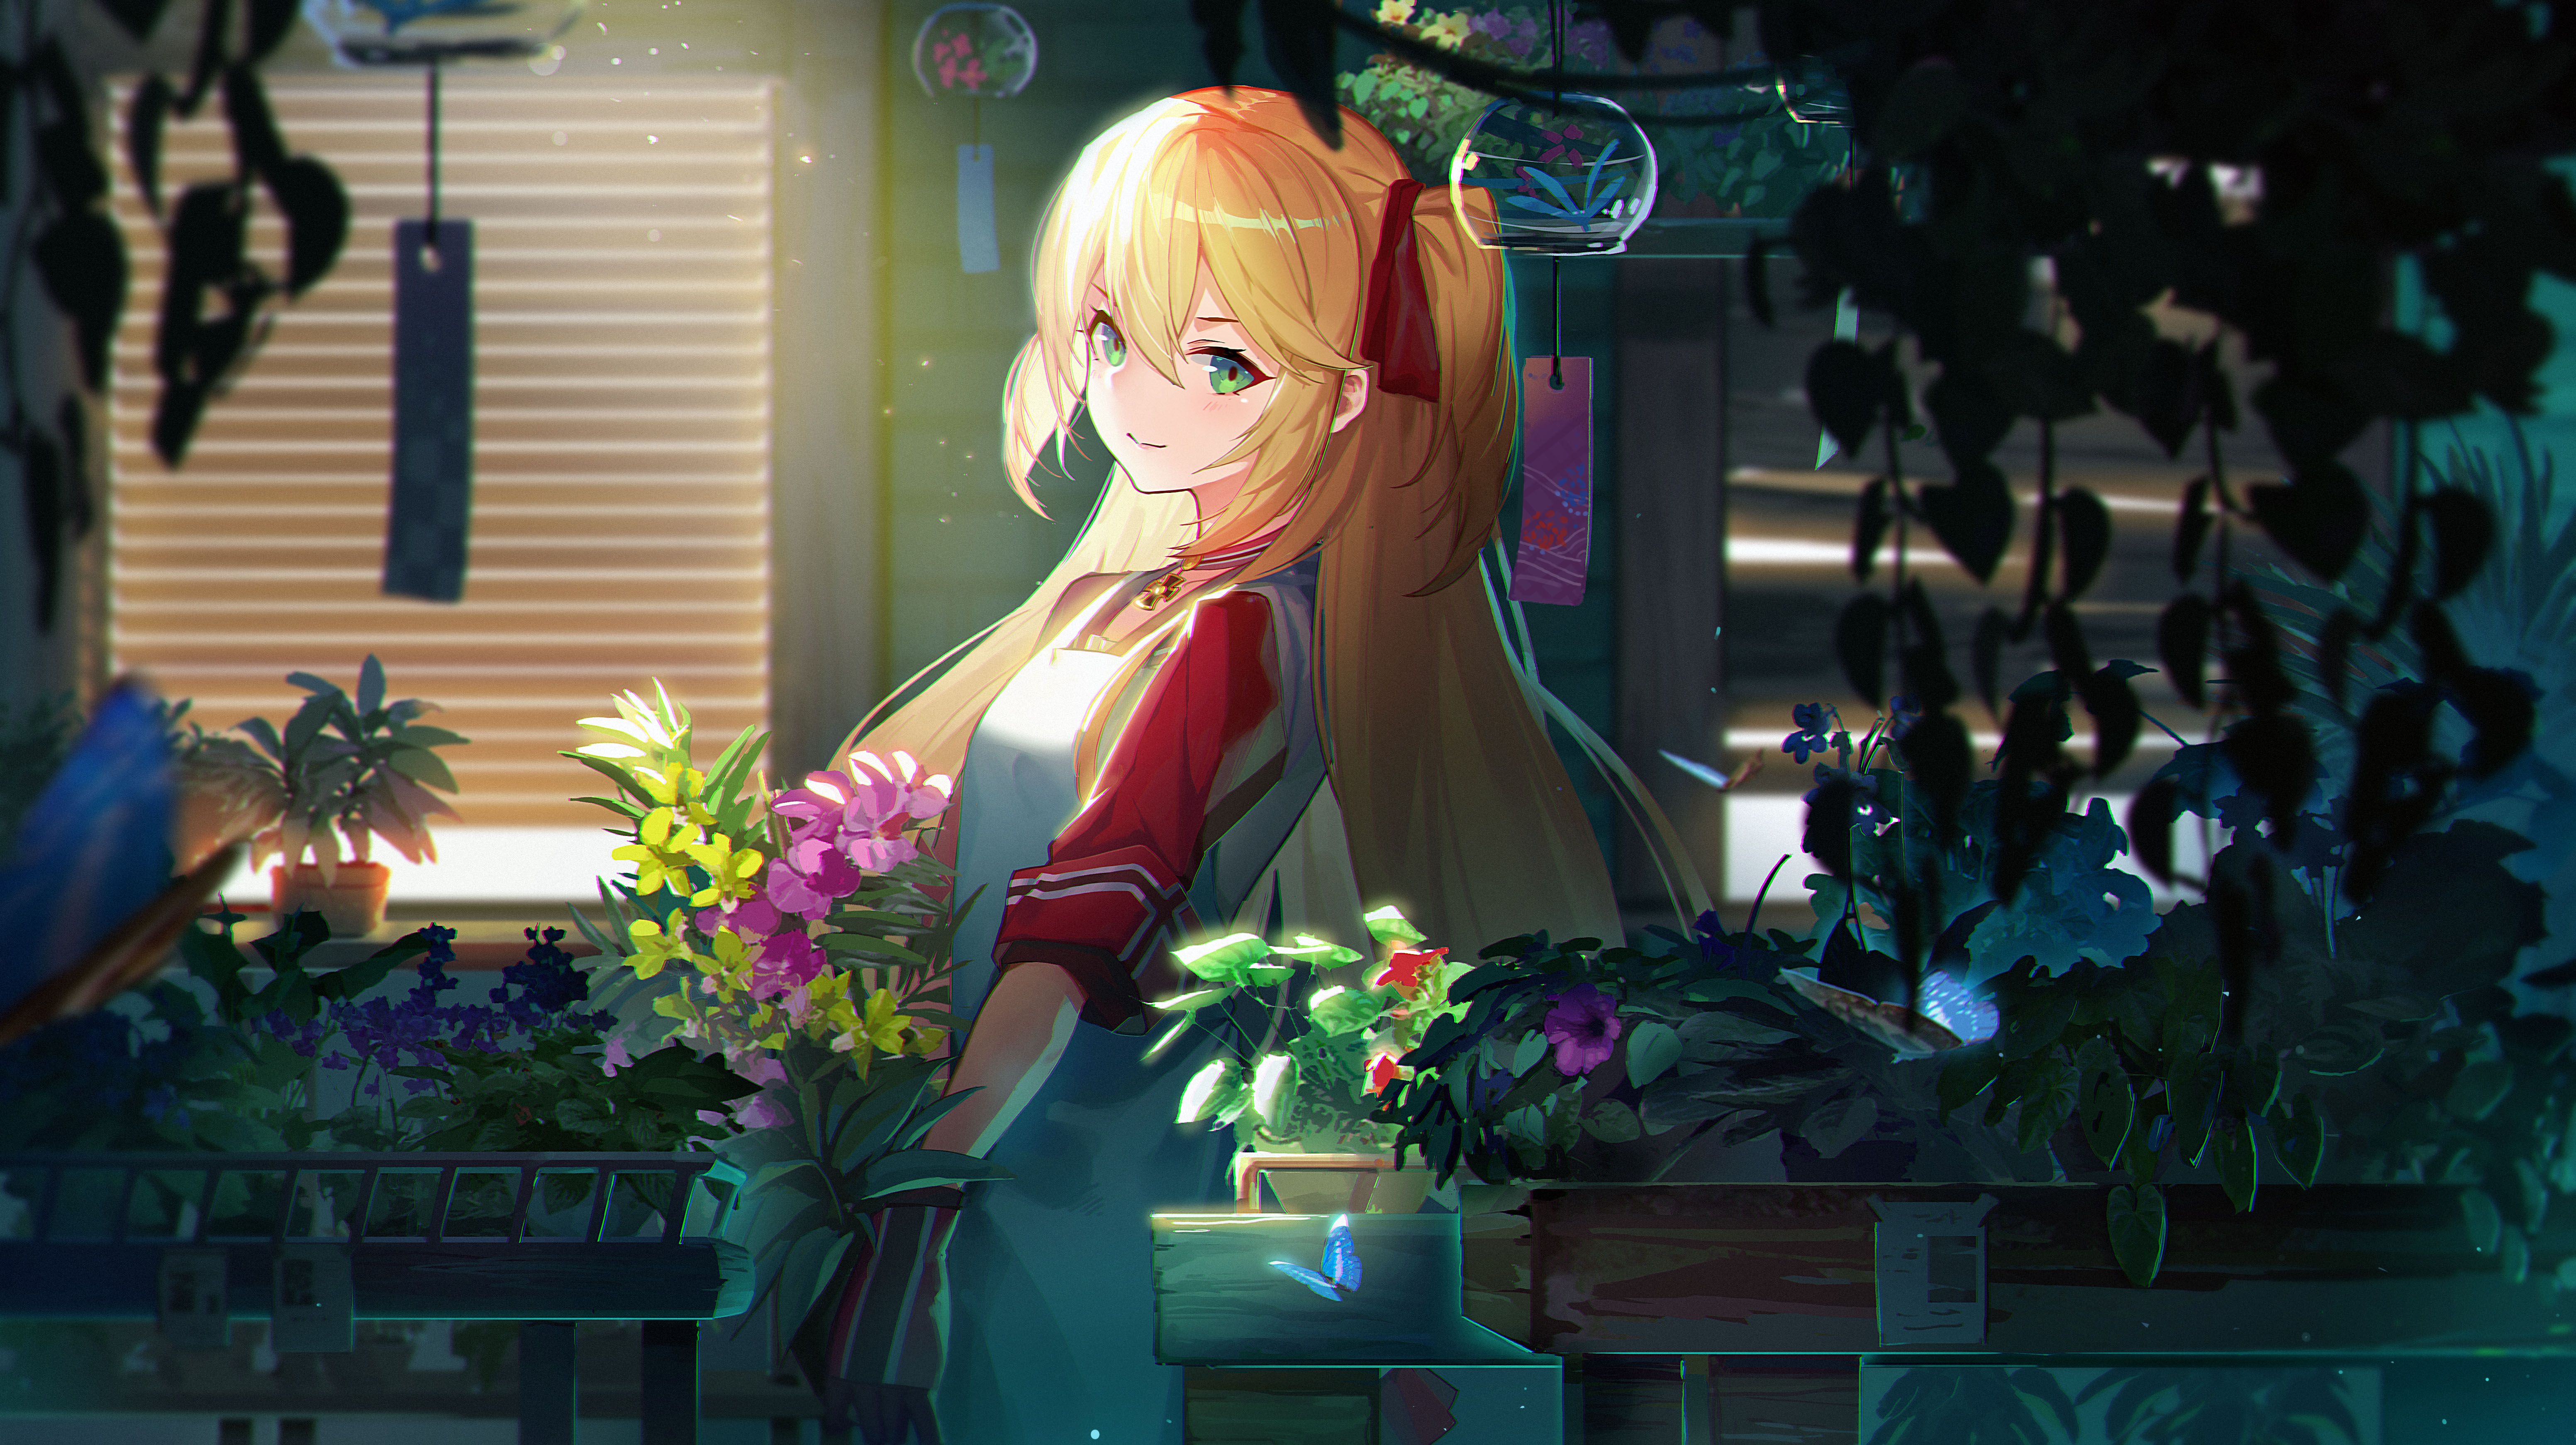 Anime Flowers Blonde Twintails Girl, HD Anime, 4k Wallpaper